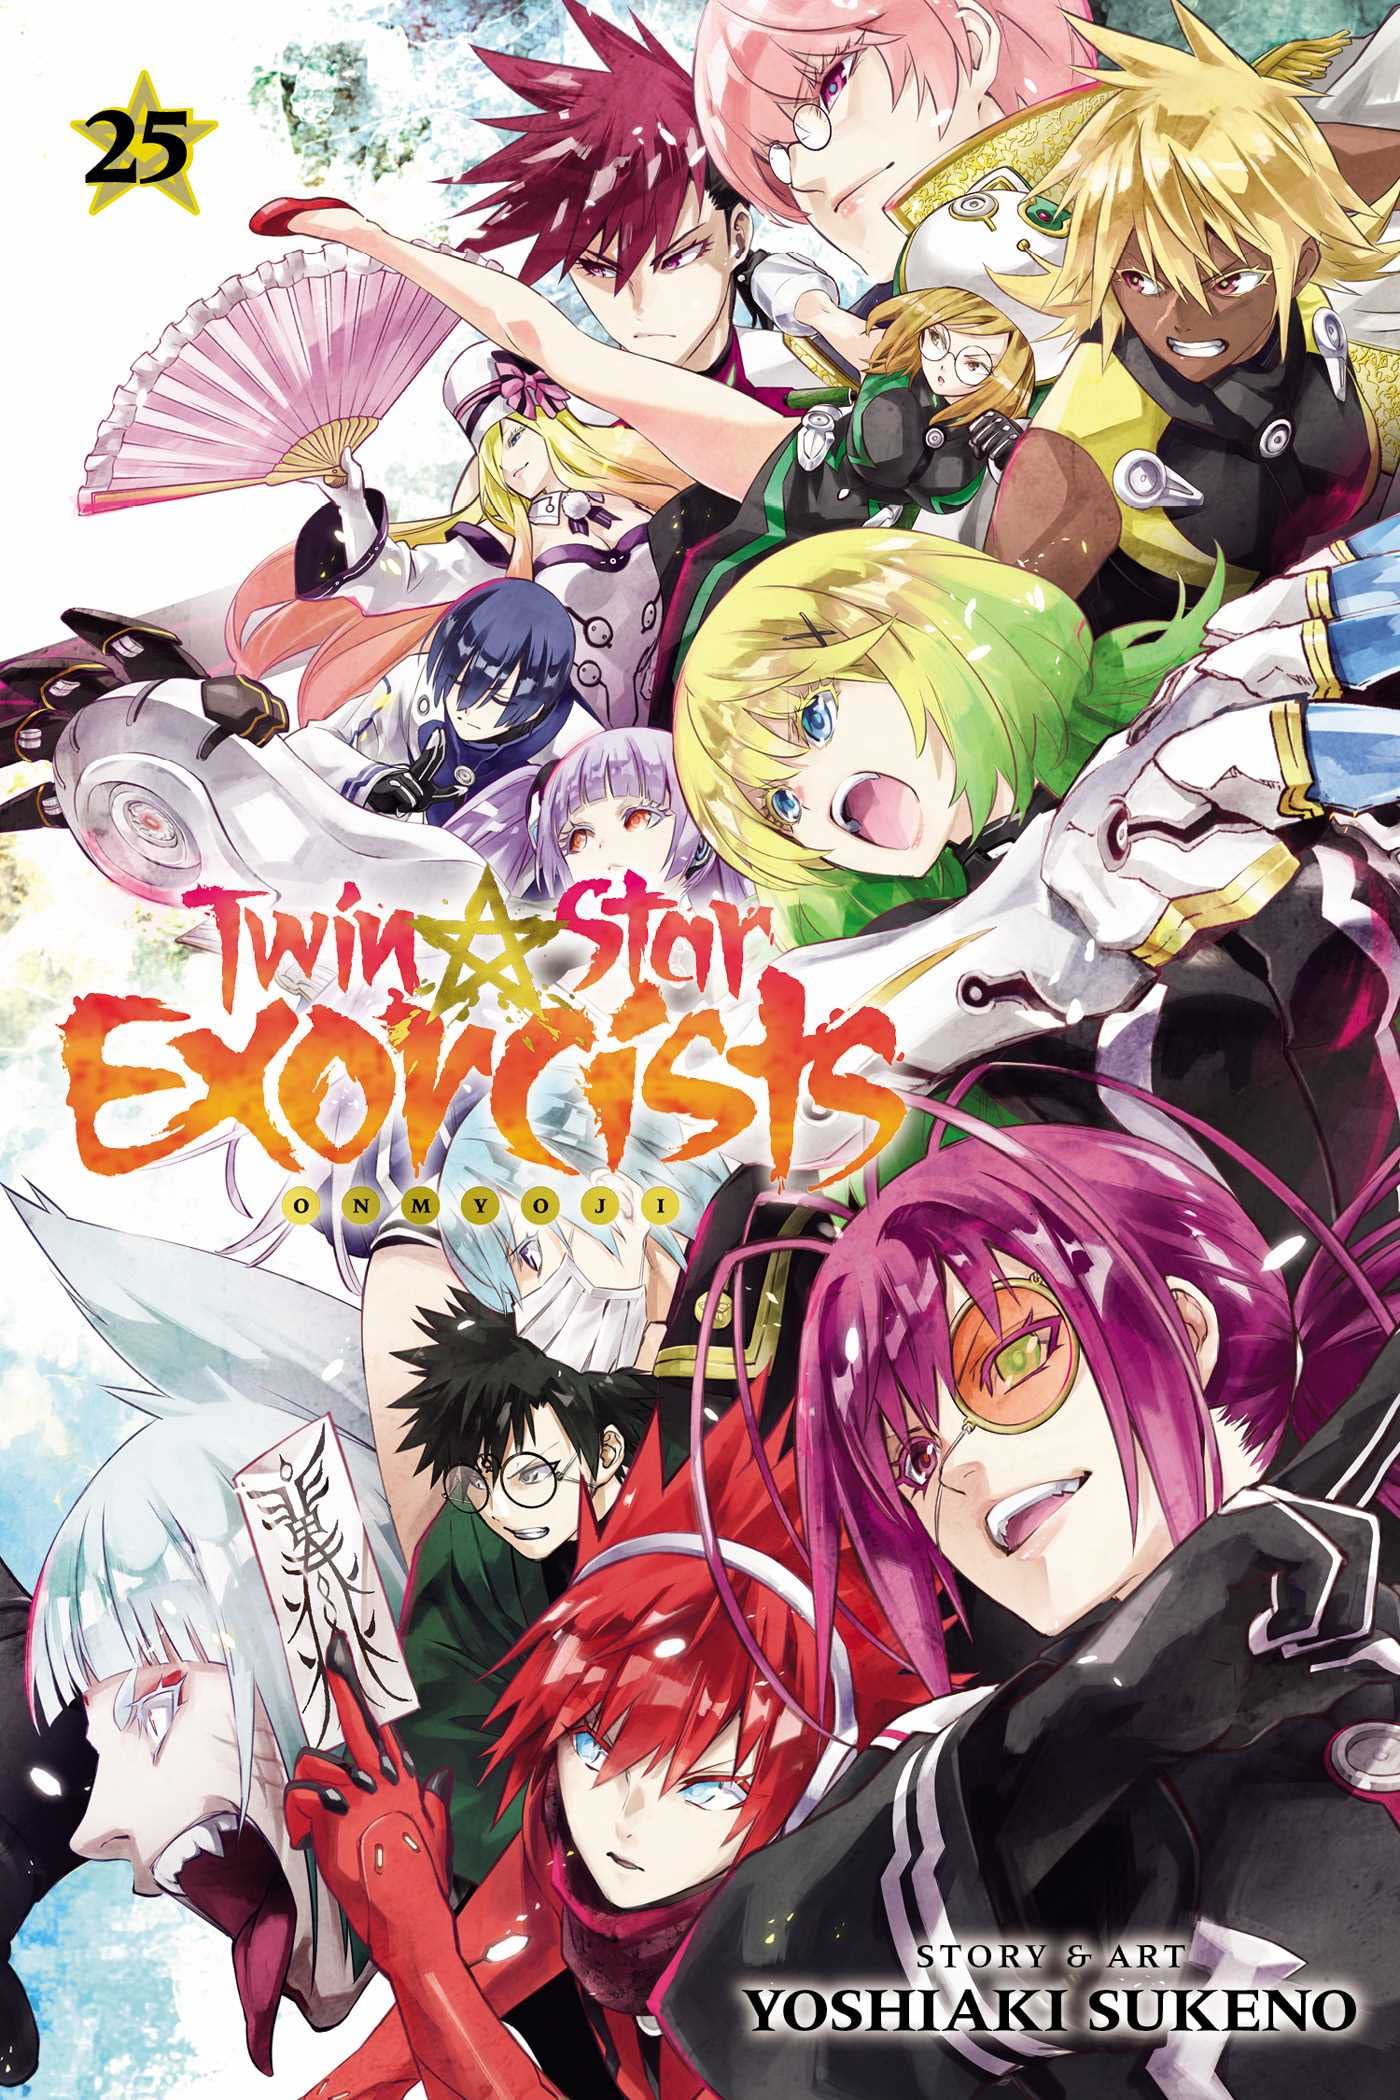 Twin Star Exorcists Vol. 25